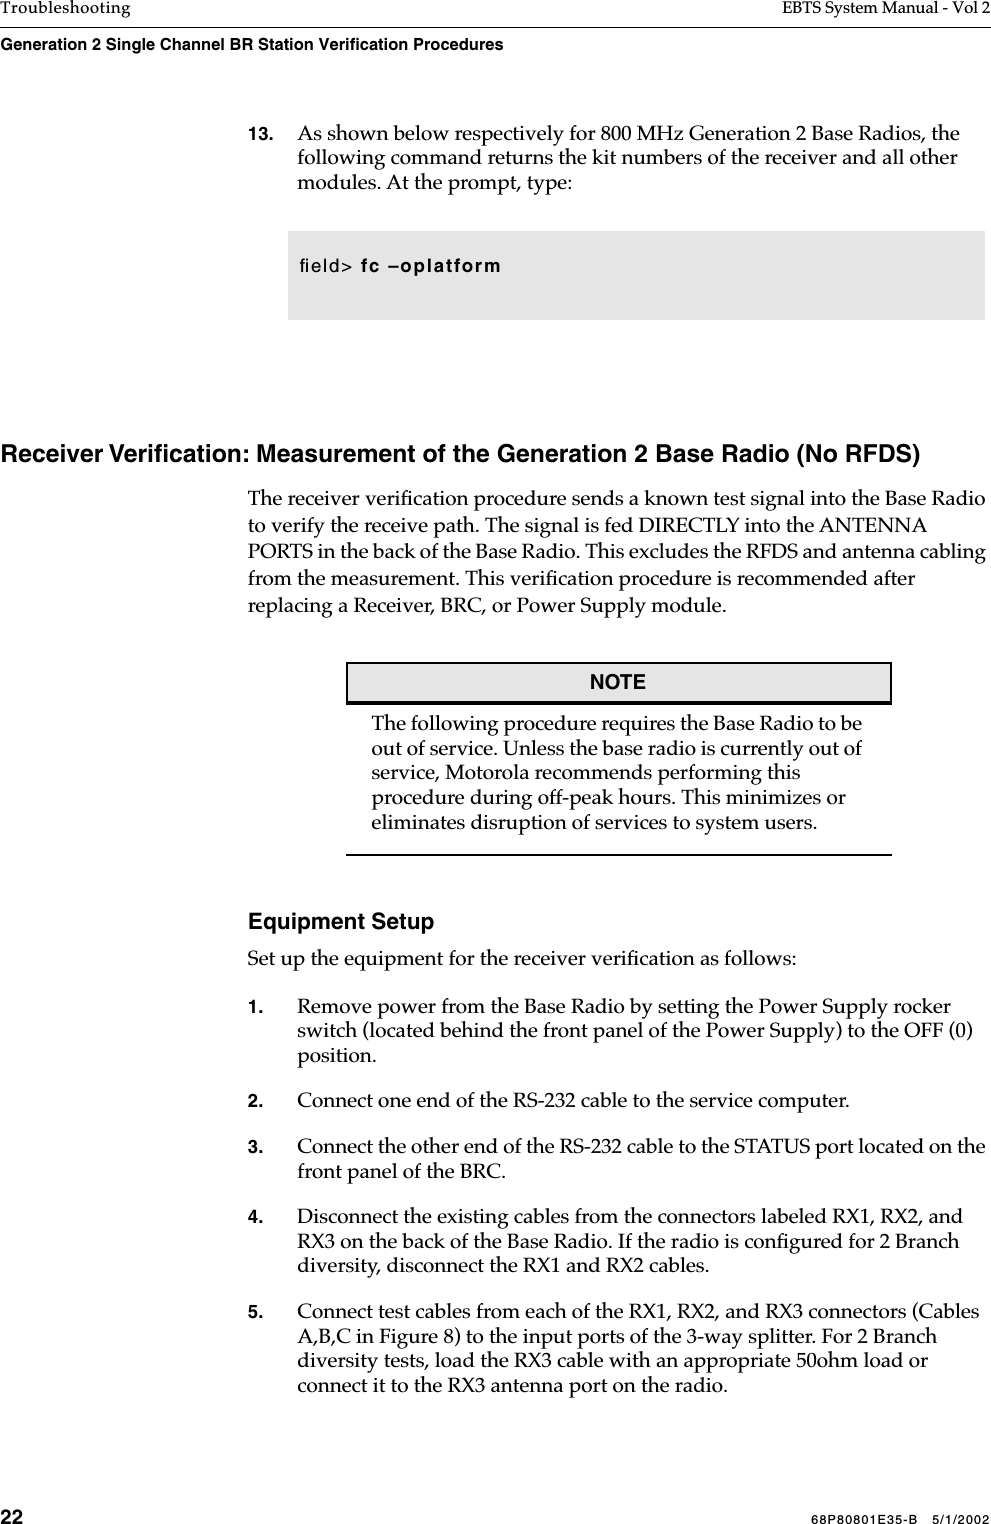 22 68P80801E35-B   5/1/2002Troubleshooting EBTS System Manual - Vol 2Generation 2 Single Channel BR Station Verification Procedures 13. As shown below respectively for 800 MHz Generation 2 Base Radios, the following command returns the kit numbers of the receiver and all other modules. At the prompt, type: Receiver Veriﬁcation: Measurement of the Generation 2 Base Radio (No RFDS)The receiver veriﬁcation procedure sends a known test signal into the Base Radio to verify the receive path. The signal is fed DIRECTLY into the ANTENNA PORTS in the back of the Base Radio. This excludes the RFDS and antenna cabling from the measurement. This veriﬁcation procedure is recommended after replacing a Receiver, BRC, or Power Supply module.NOTEThe following procedure requires the Base Radio to be out of service. Unless the base radio is currently out of service, Motorola recommends performing this procedure during off-peak hours. This minimizes or eliminates disruption of services to system users.Equipment SetupSet up the equipment for the receiver veriﬁcation as follows:1. Remove power from the Base Radio by setting the Power Supply rocker switch (located behind the front panel of the Power Supply) to the OFF (0) position.2. Connect one end of the RS-232 cable to the service computer.3. Connect the other end of the RS-232 cable to the STATUS port located on the front panel of the BRC. 4. Disconnect the existing cables from the connectors labeled RX1, RX2, and RX3 on the back of the Base Radio. If the radio is conﬁgured for 2 Branch diversity, disconnect the RX1 and RX2 cables. 5. Connect test cables from each of the RX1, RX2, and RX3 connectors (Cables A,B,C in Figure 8) to the input ports of the 3-way splitter. For 2 Branch diversity tests, load the RX3 cable with an appropriate 50ohm load or connect it to the RX3 antenna port on the radio.ﬁeld&gt; fc –oplatform